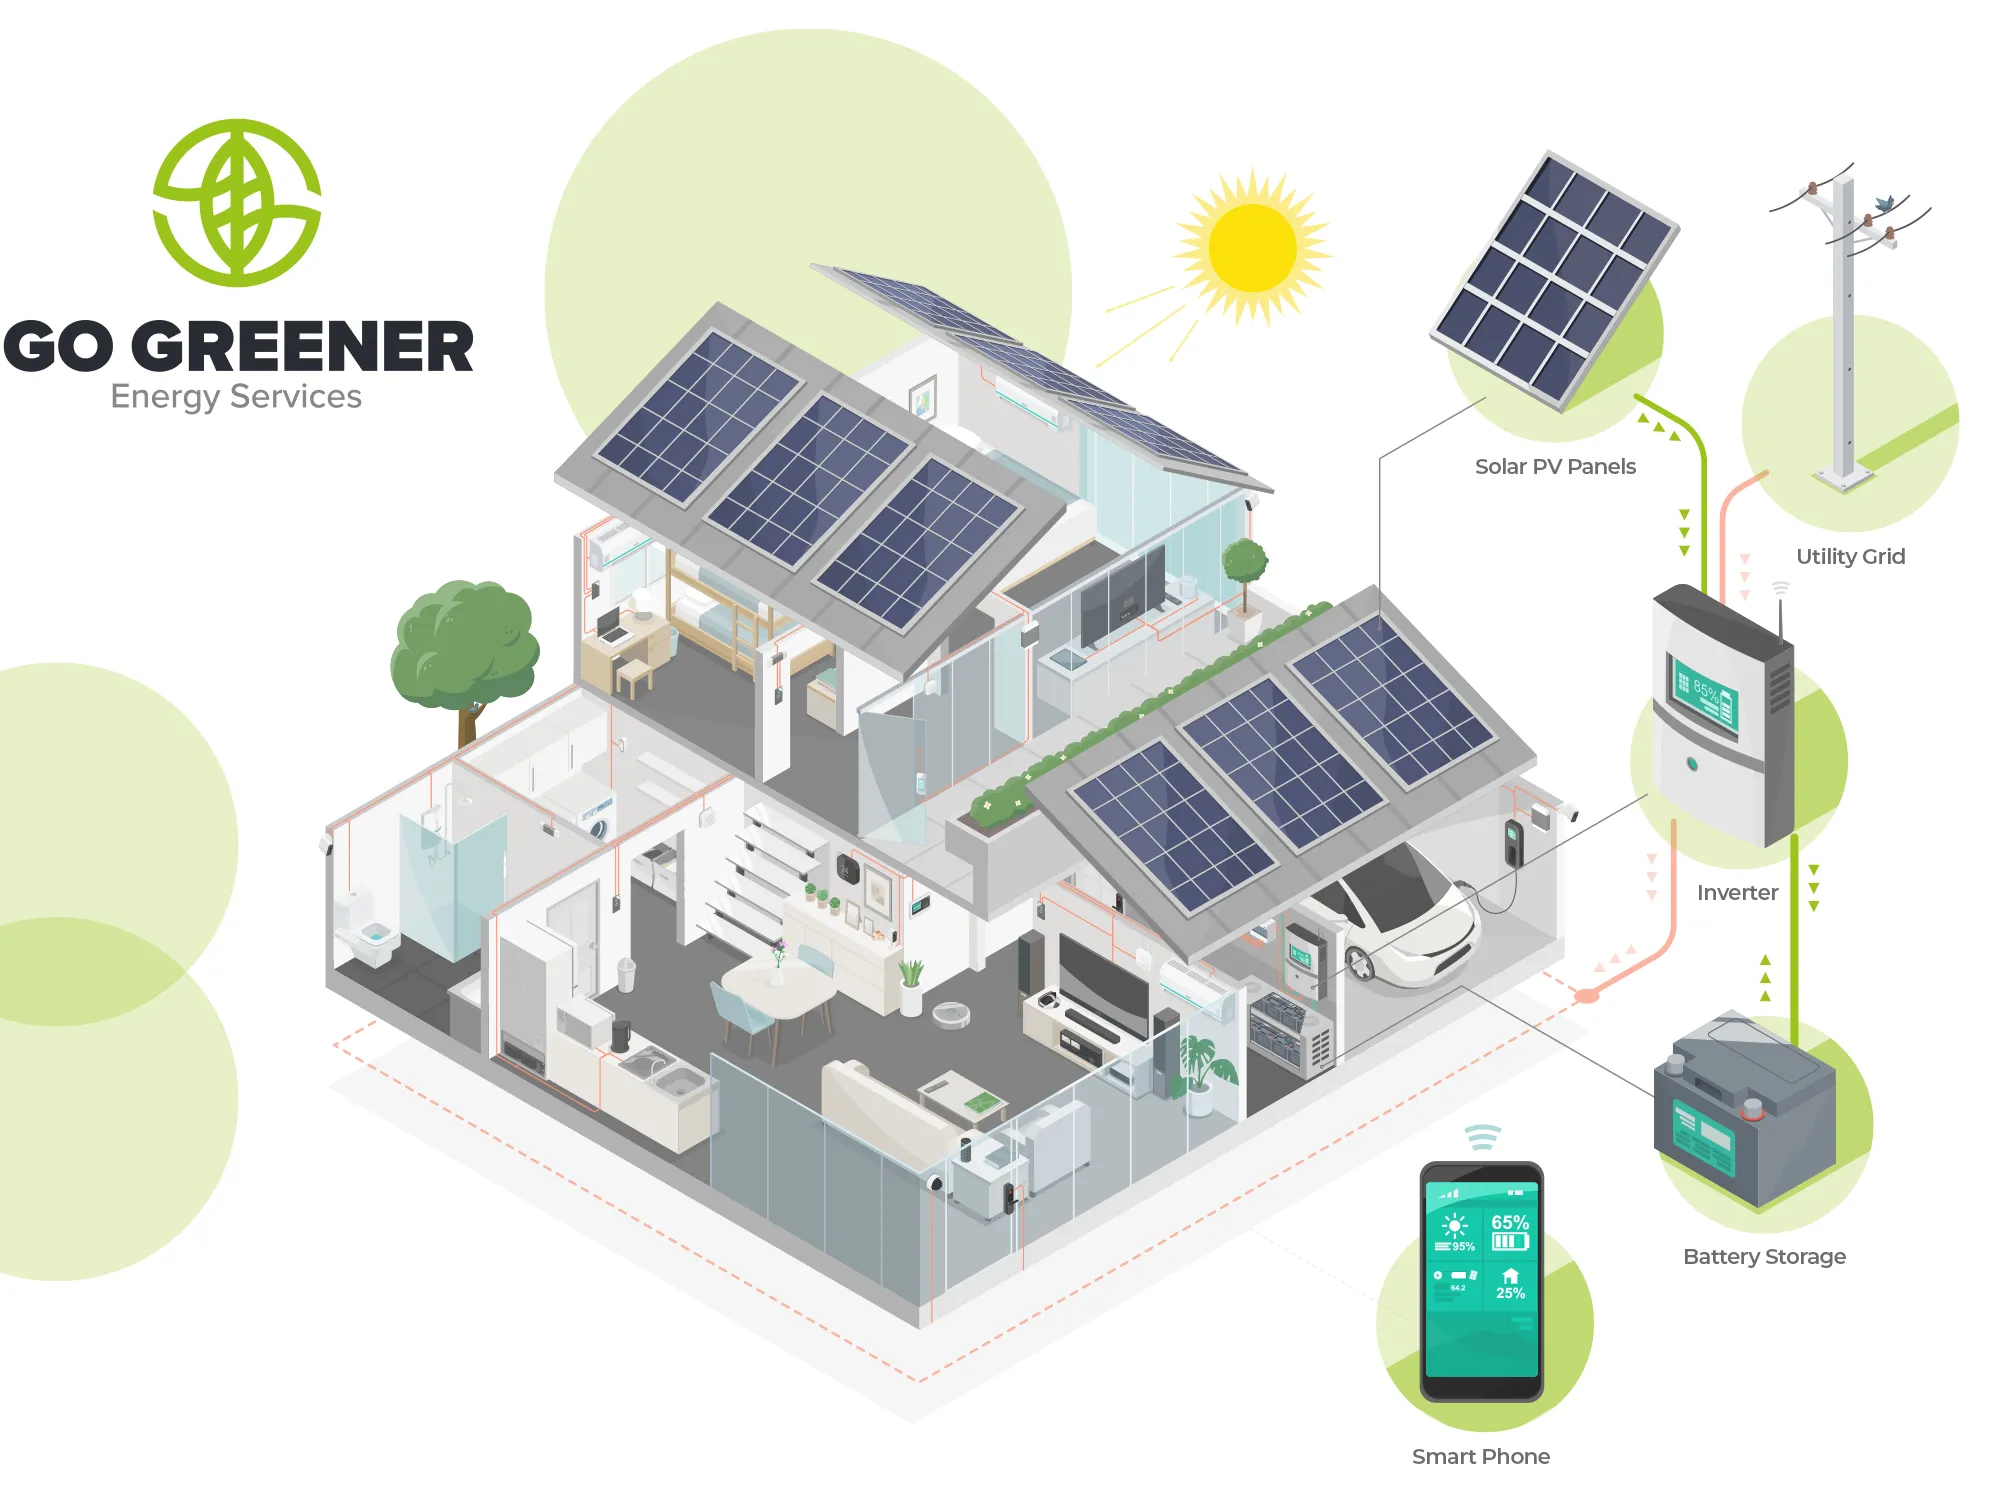 Solar PV Systems from Go Greener Energy Services